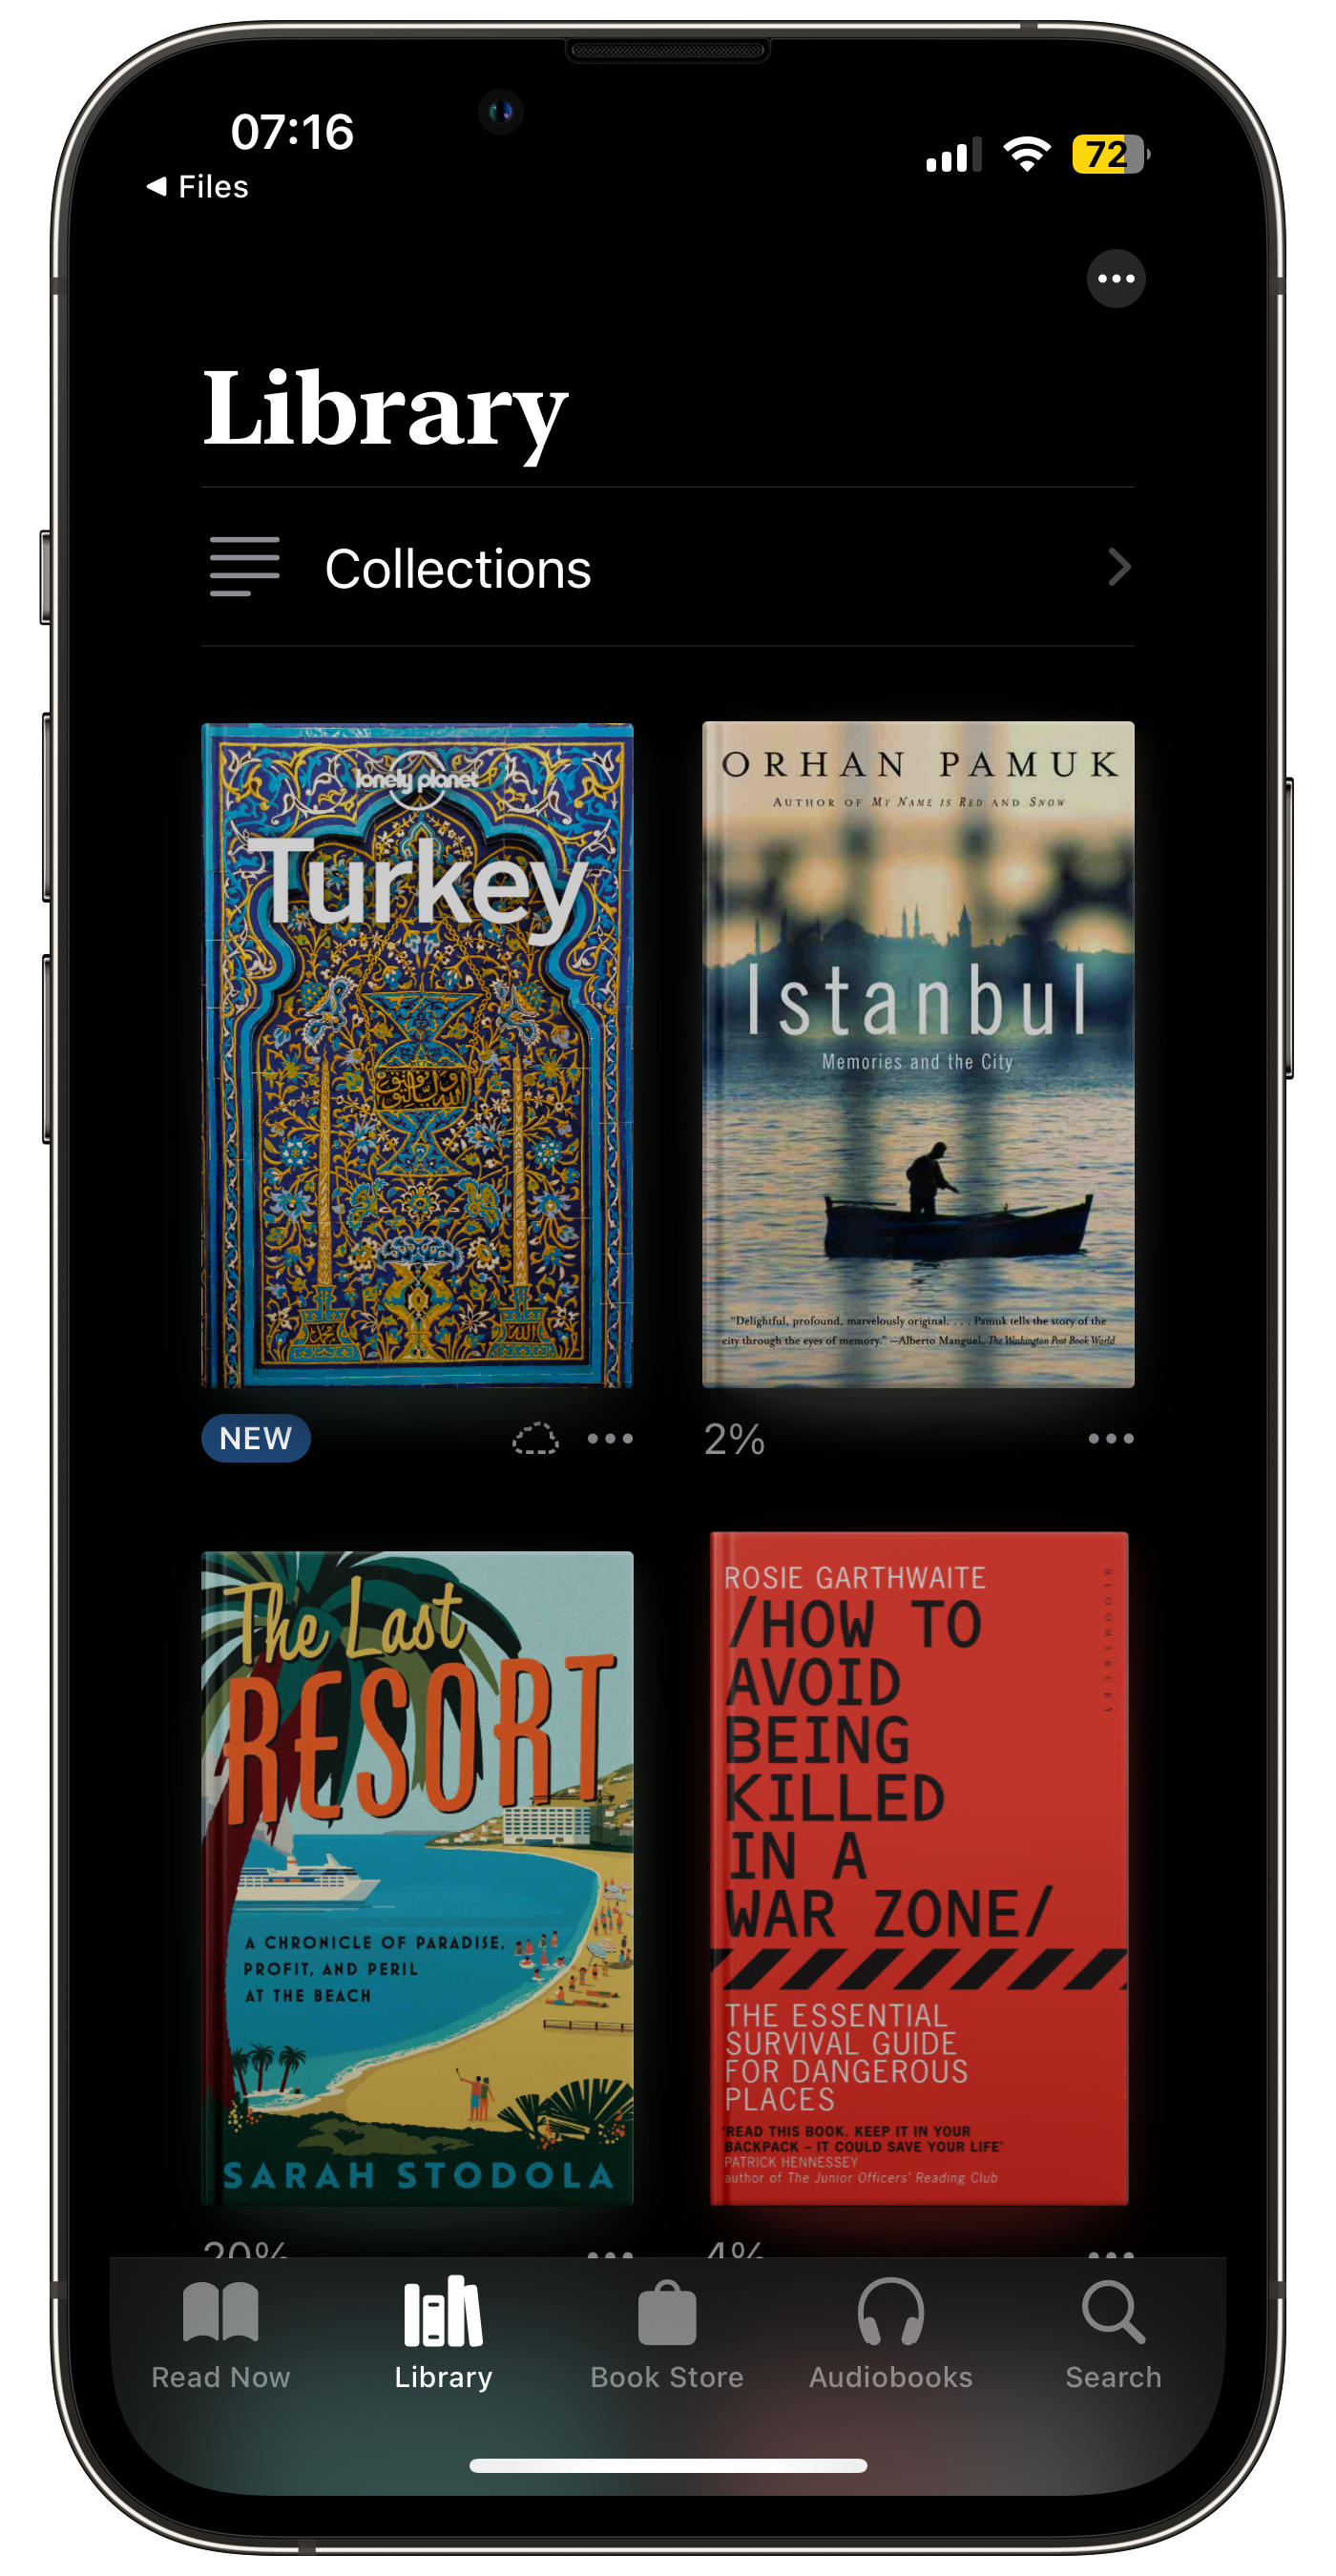 iPhone mockup showing Books, with Lonely Planet Turkey, and Istanbul, by Orhan Pamuk.